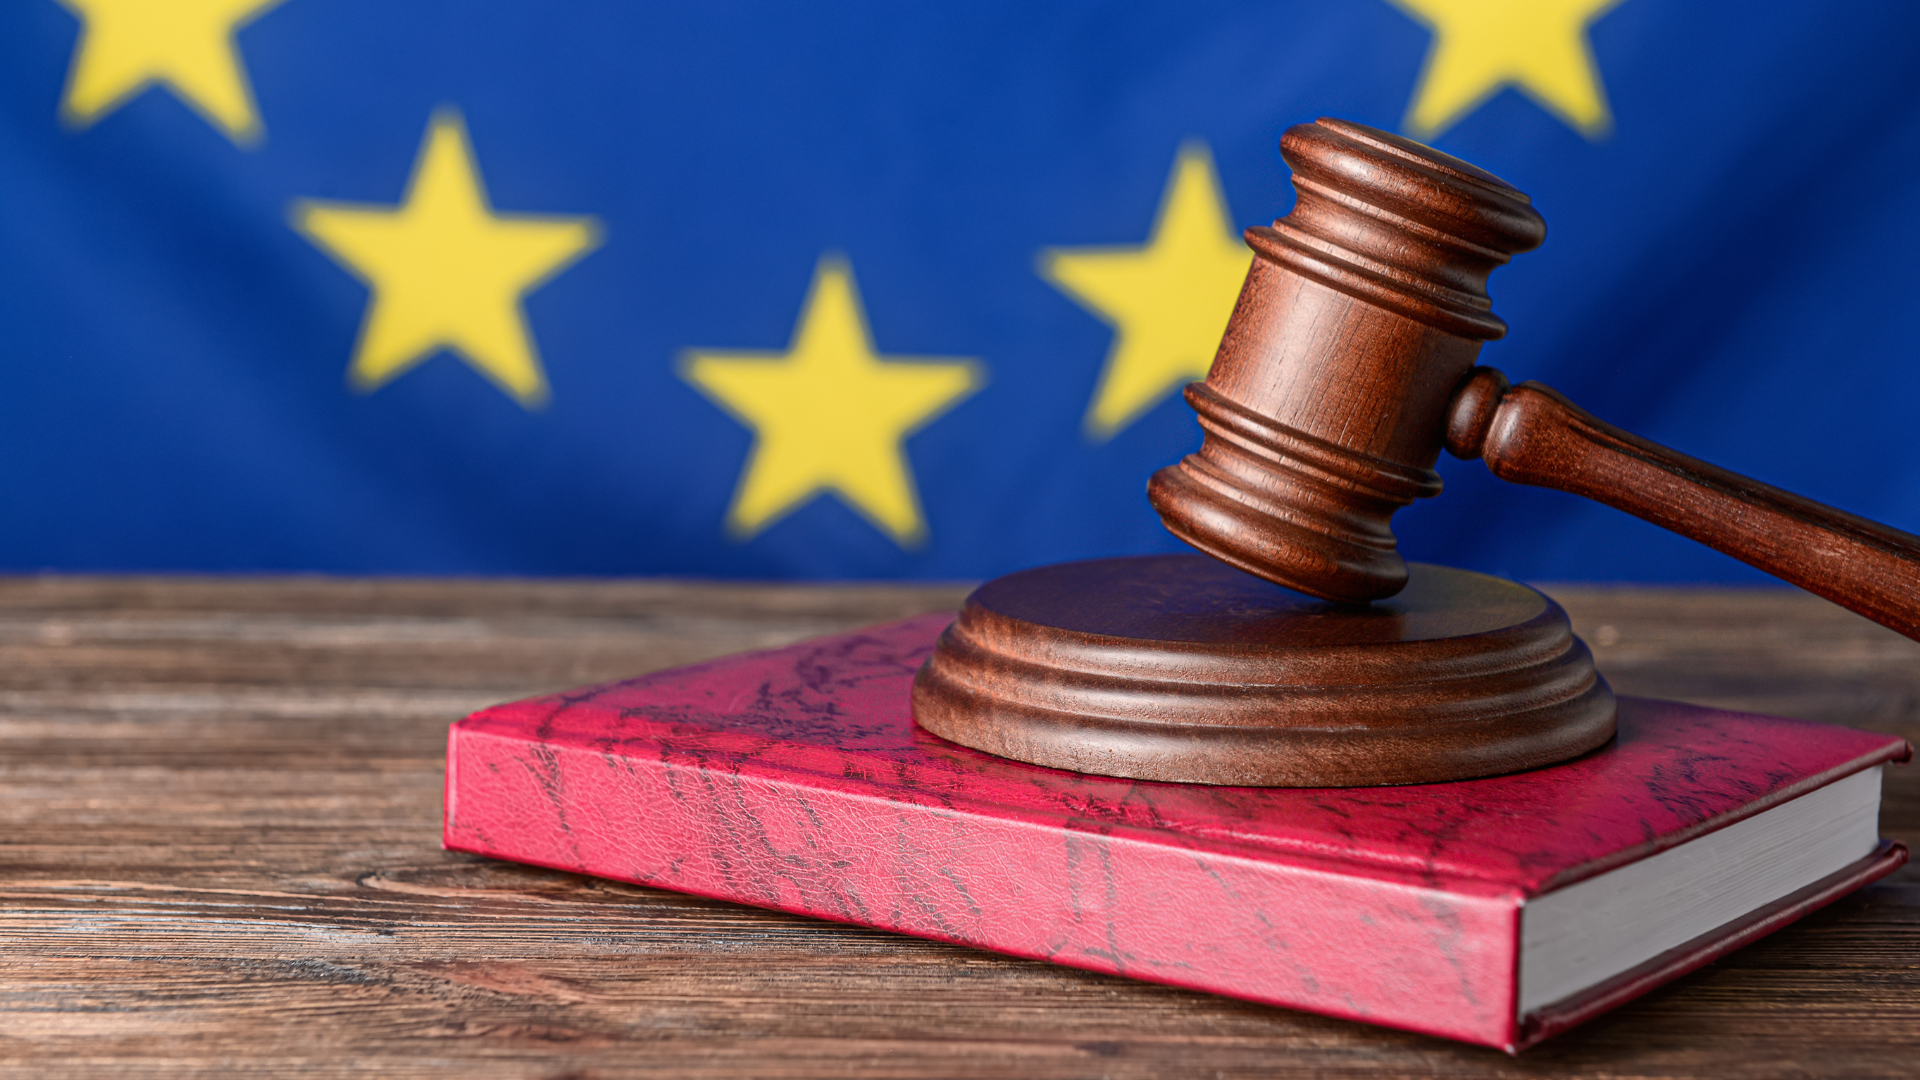 Access Alert | New Judgment from the Court of Justice of the European Union on Lawful Interception Obligations